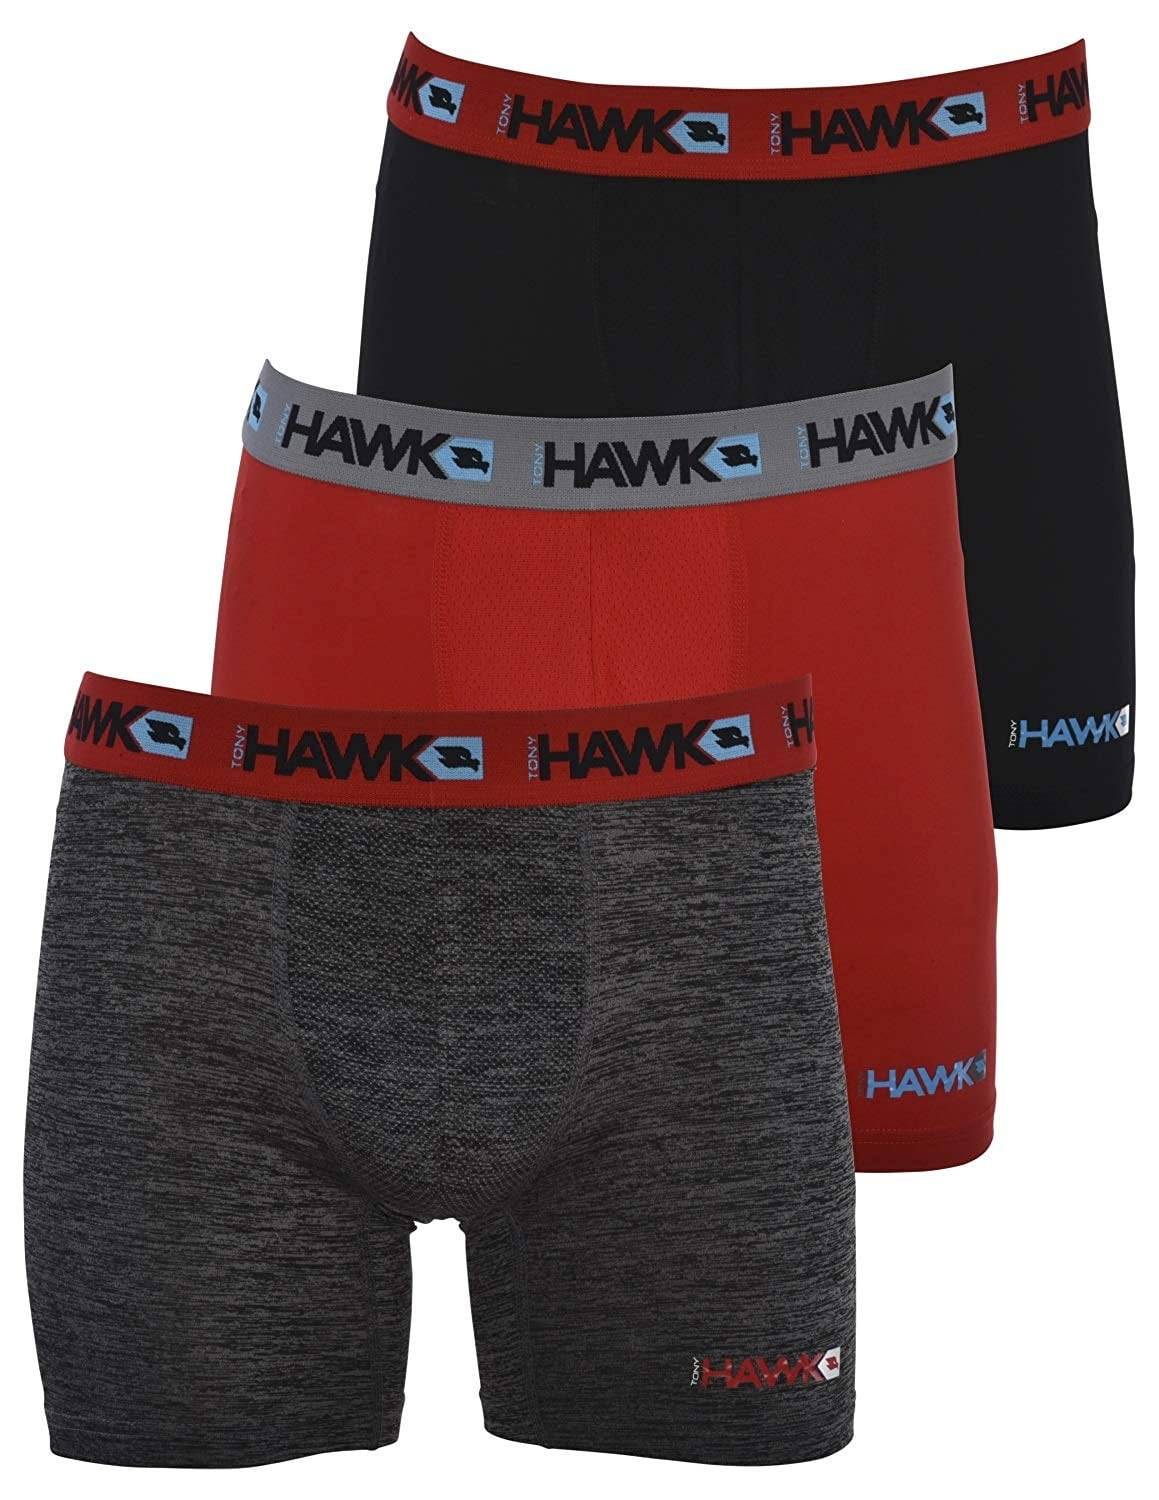 Tony Hawk Mens Performance Boxer Briefs 12-Pack Athletic Fit No Fly Breathable Tagless Underwear